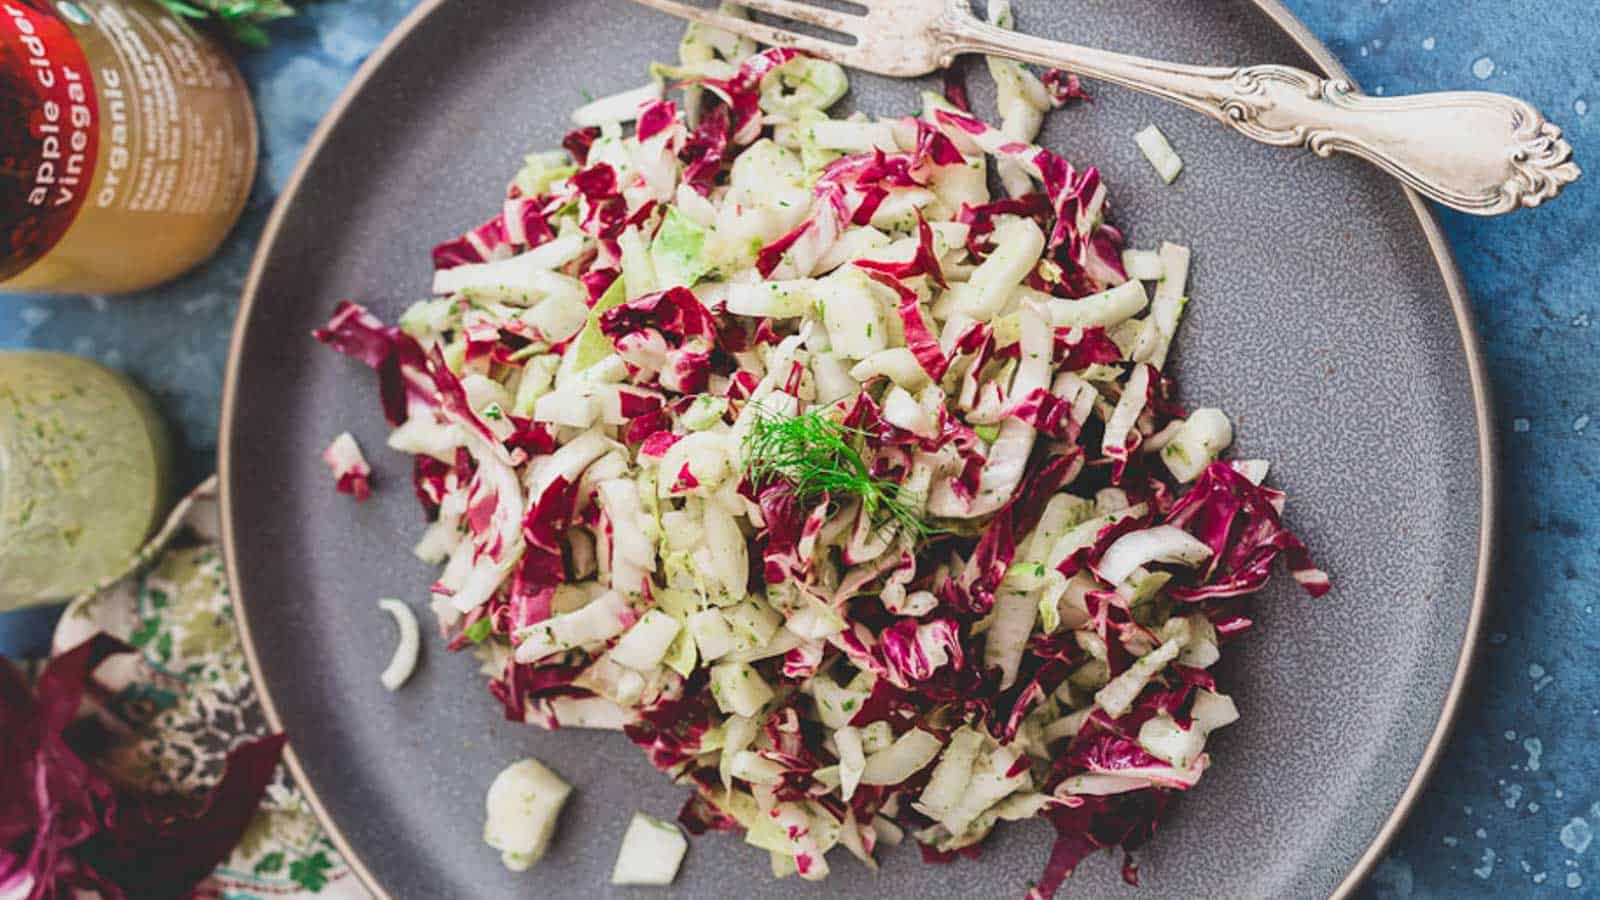 Radicchio endive fennel salad on a gray plate with a silver fork.